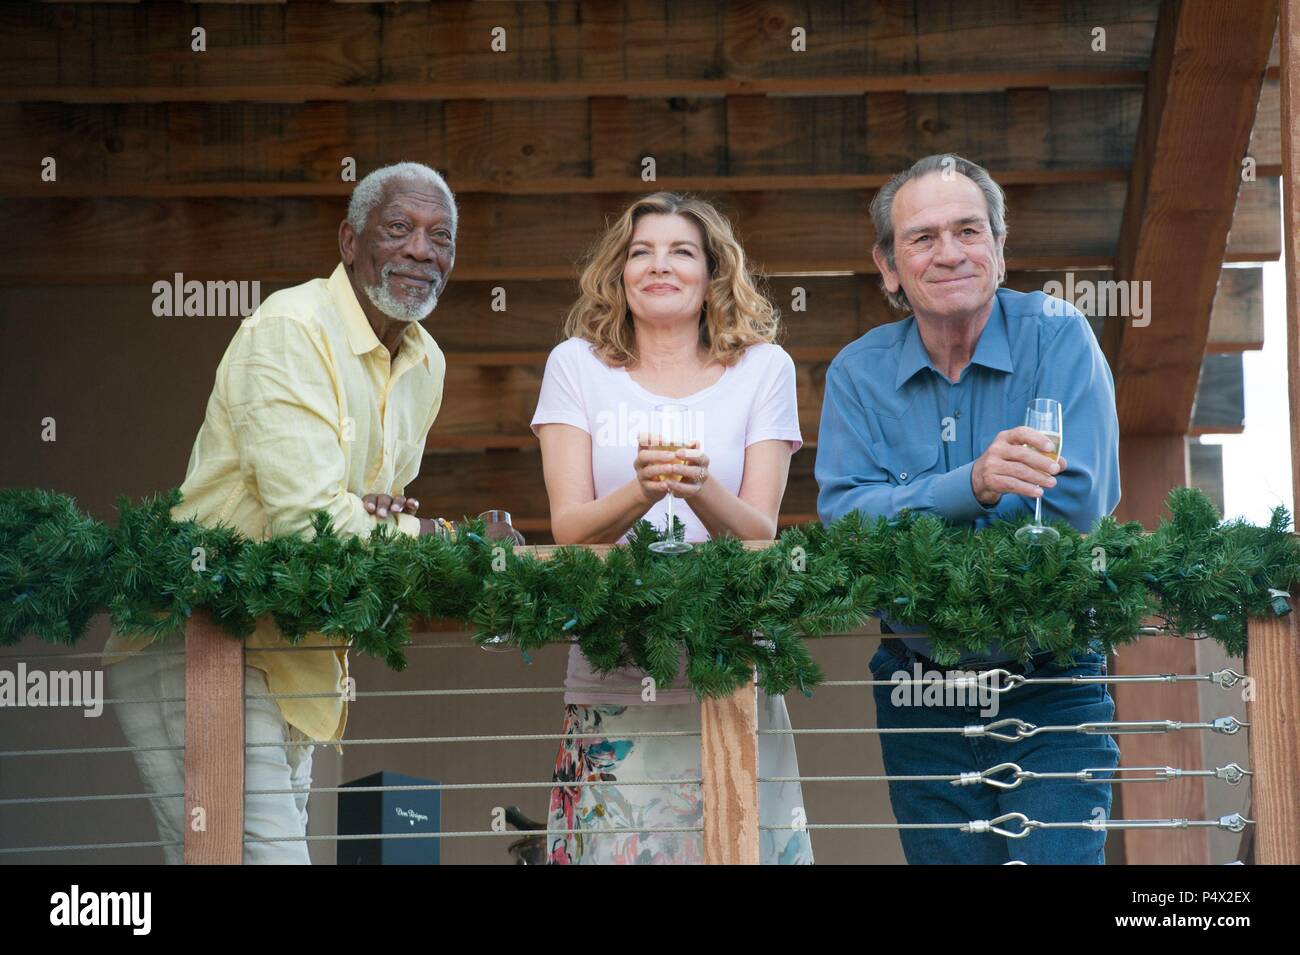 Original Film Title: JUST GETTING STARTED. English Title: JUST GETTING  STARTED. Film Director: RON SHELTON. Year: 2017. Stars: MORGAN FREEMAN; TOMMY  LEE JONES; RENE RUSSO. Credit: BROAD GREEN PICTURES/ENDURANCE  MEDIA/ENTERTAINMENT ONE /